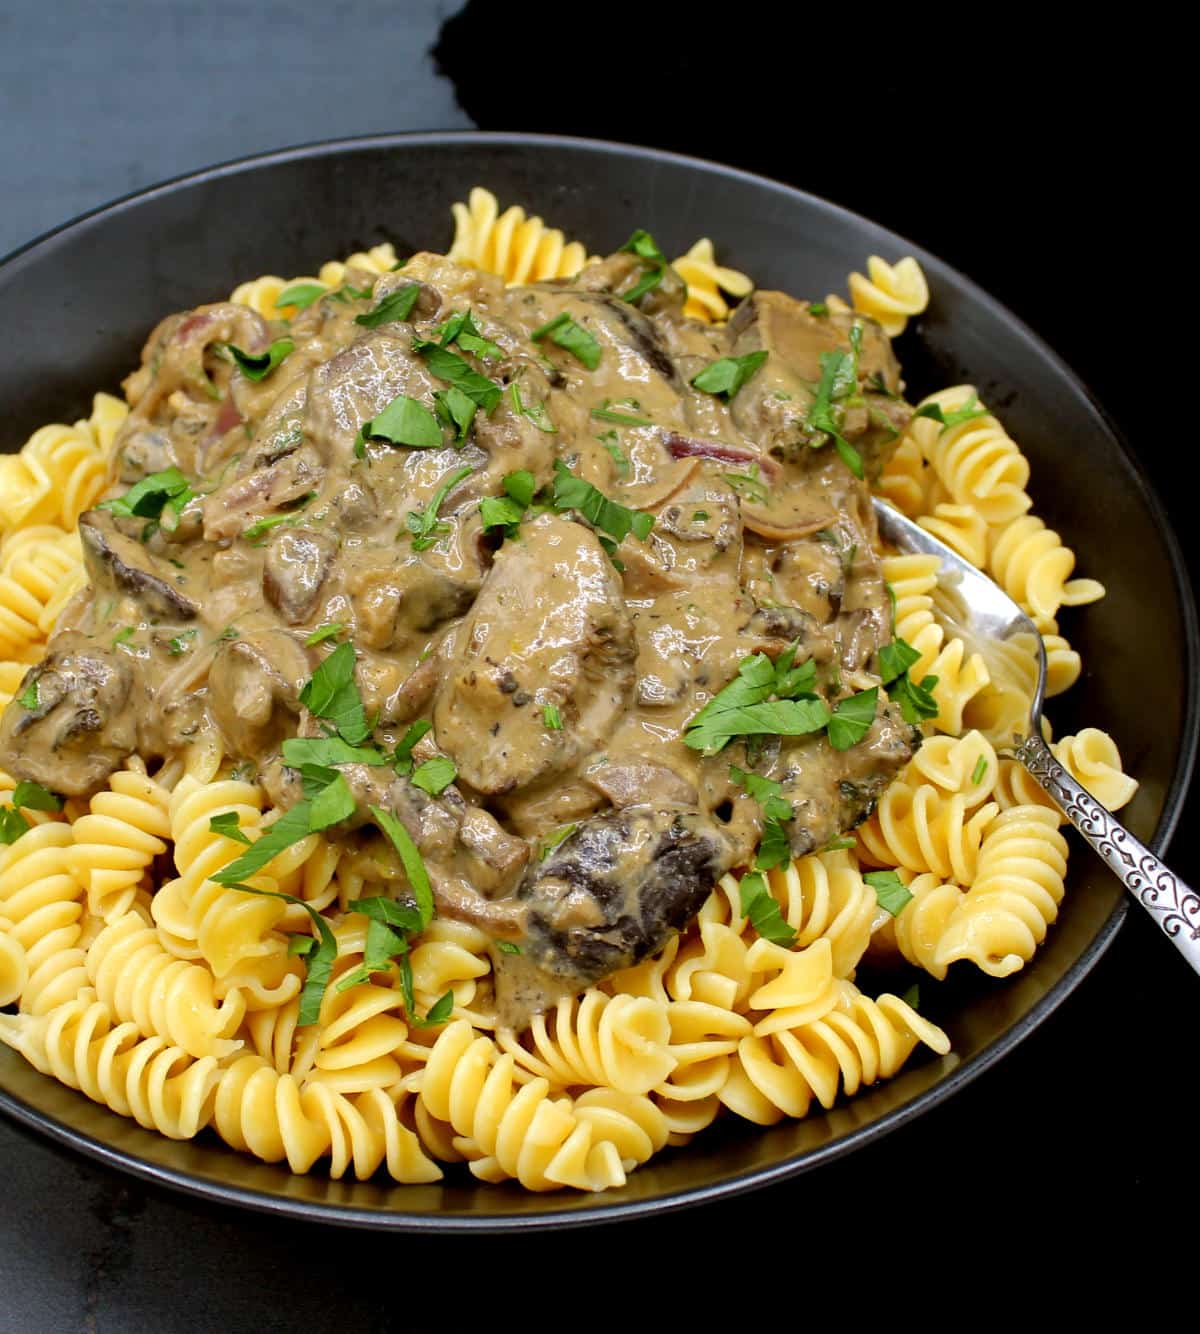 Front partial photo of mushroom stroganoff in black bowl with fork.